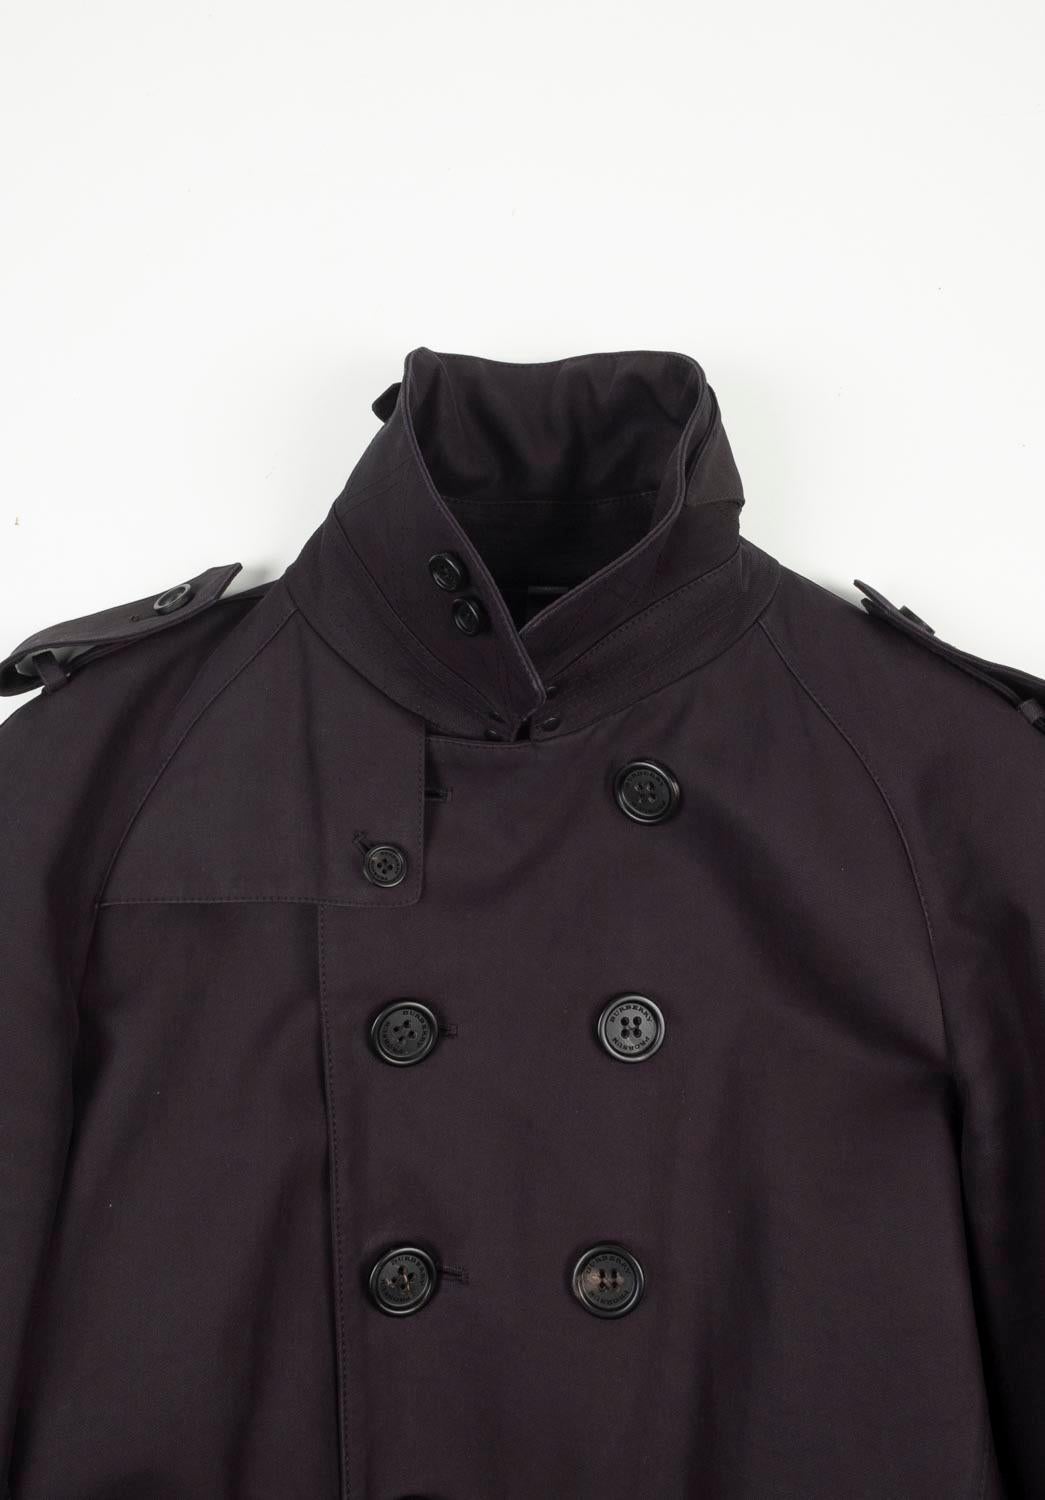 100% genuine Burberry Prorsum Runway Trench Coat, S604 
Color: black
(An actual color may a bit vary due to individual computer screen interpretation)
Material: 100% cotton
Tag size: ITA46 runs S/M
This coat is great quality item. Rate 9 of 10,